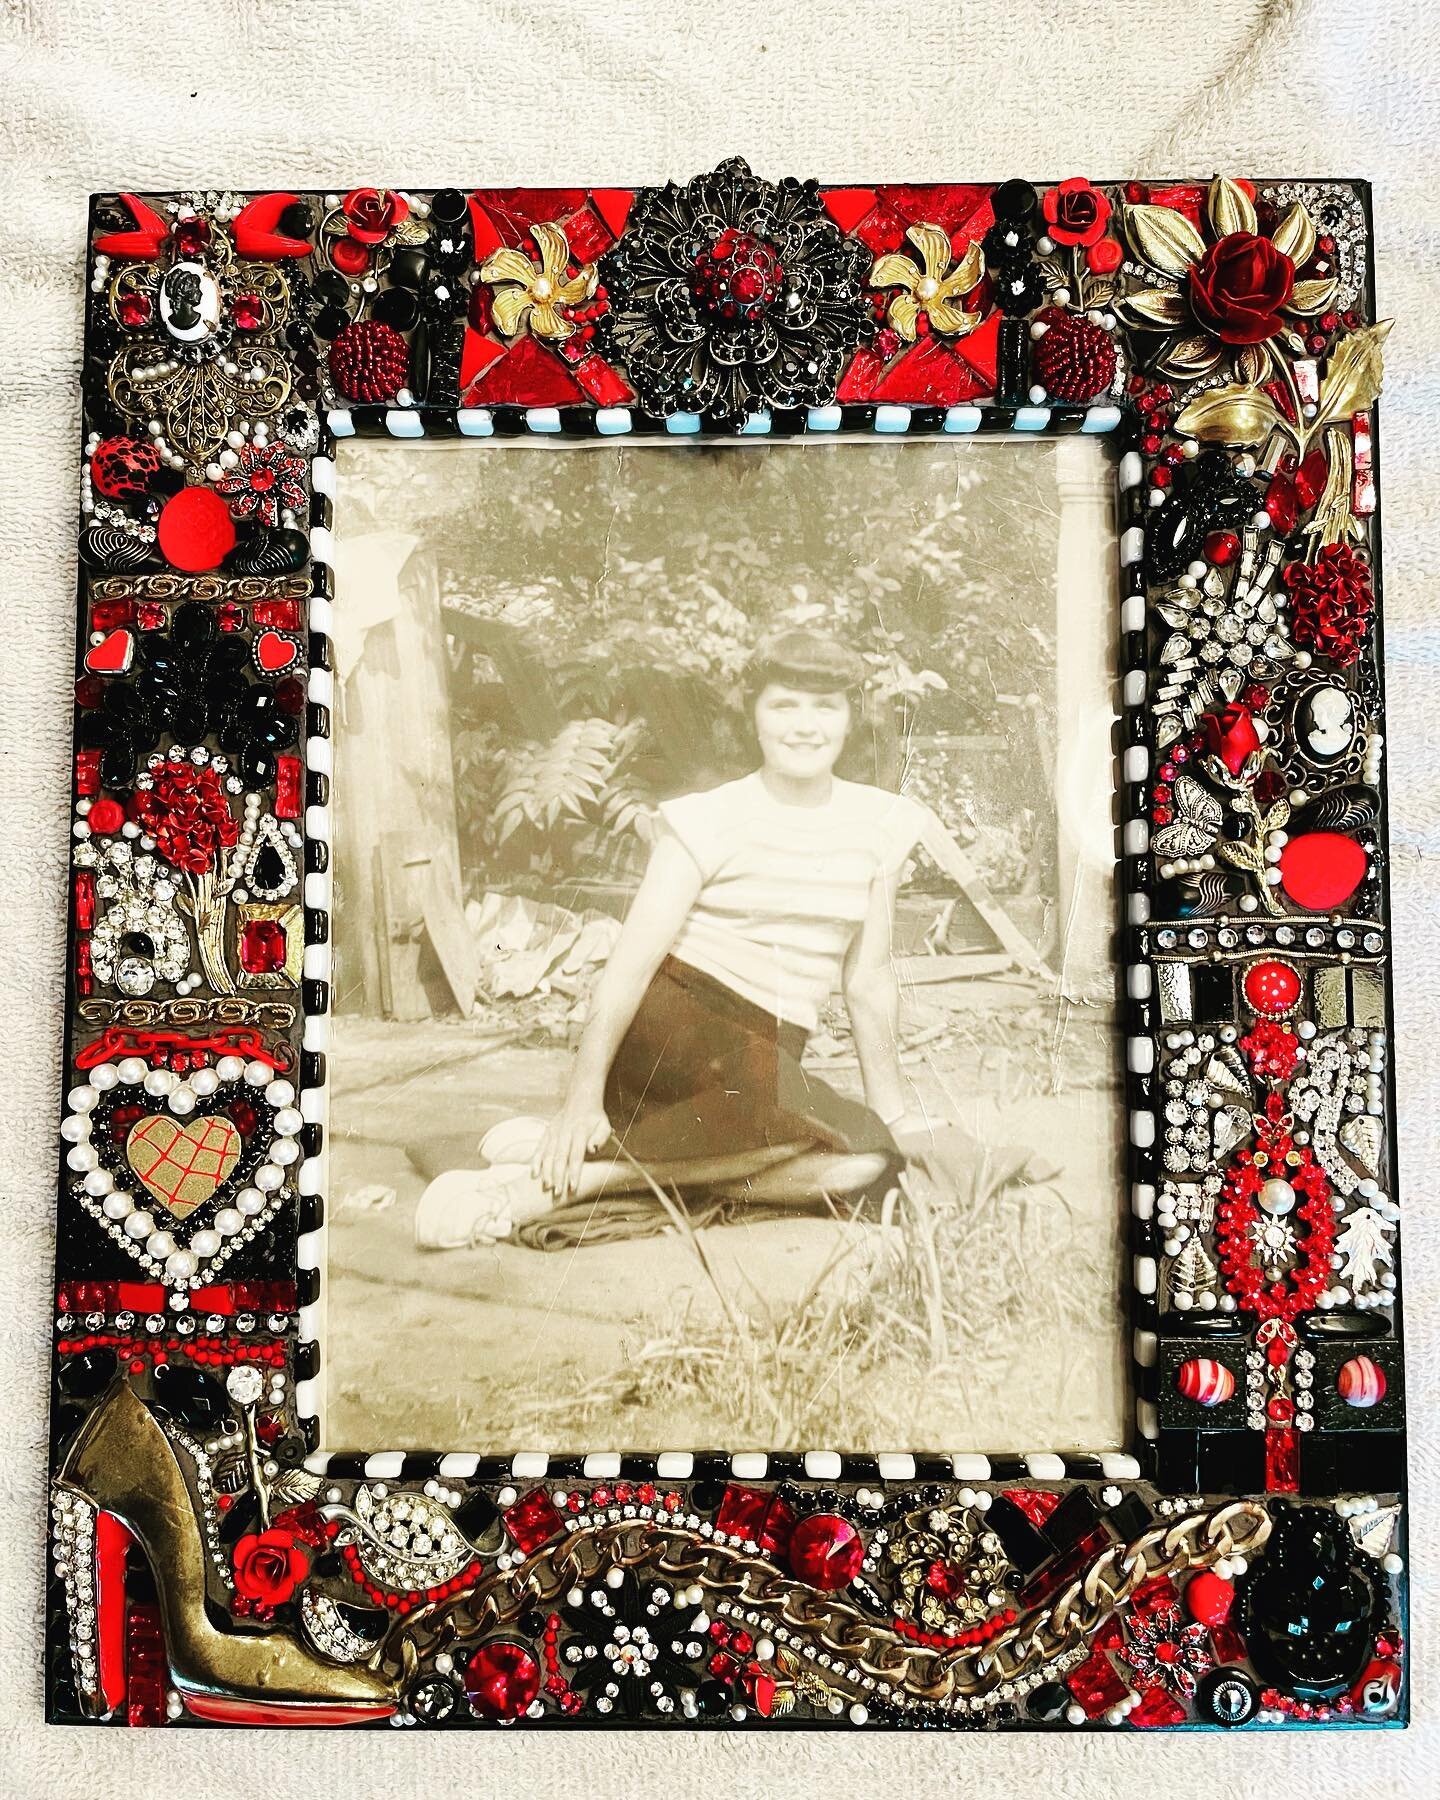 I made this jeweled frame for our nephew to celebrate his grandmother. The photo is her at age 15 but as an adult she was quite the Italian glamour girl. She loved red roses and red lipstick, diamonds and high heels. I&rsquo;m told this frame was so 